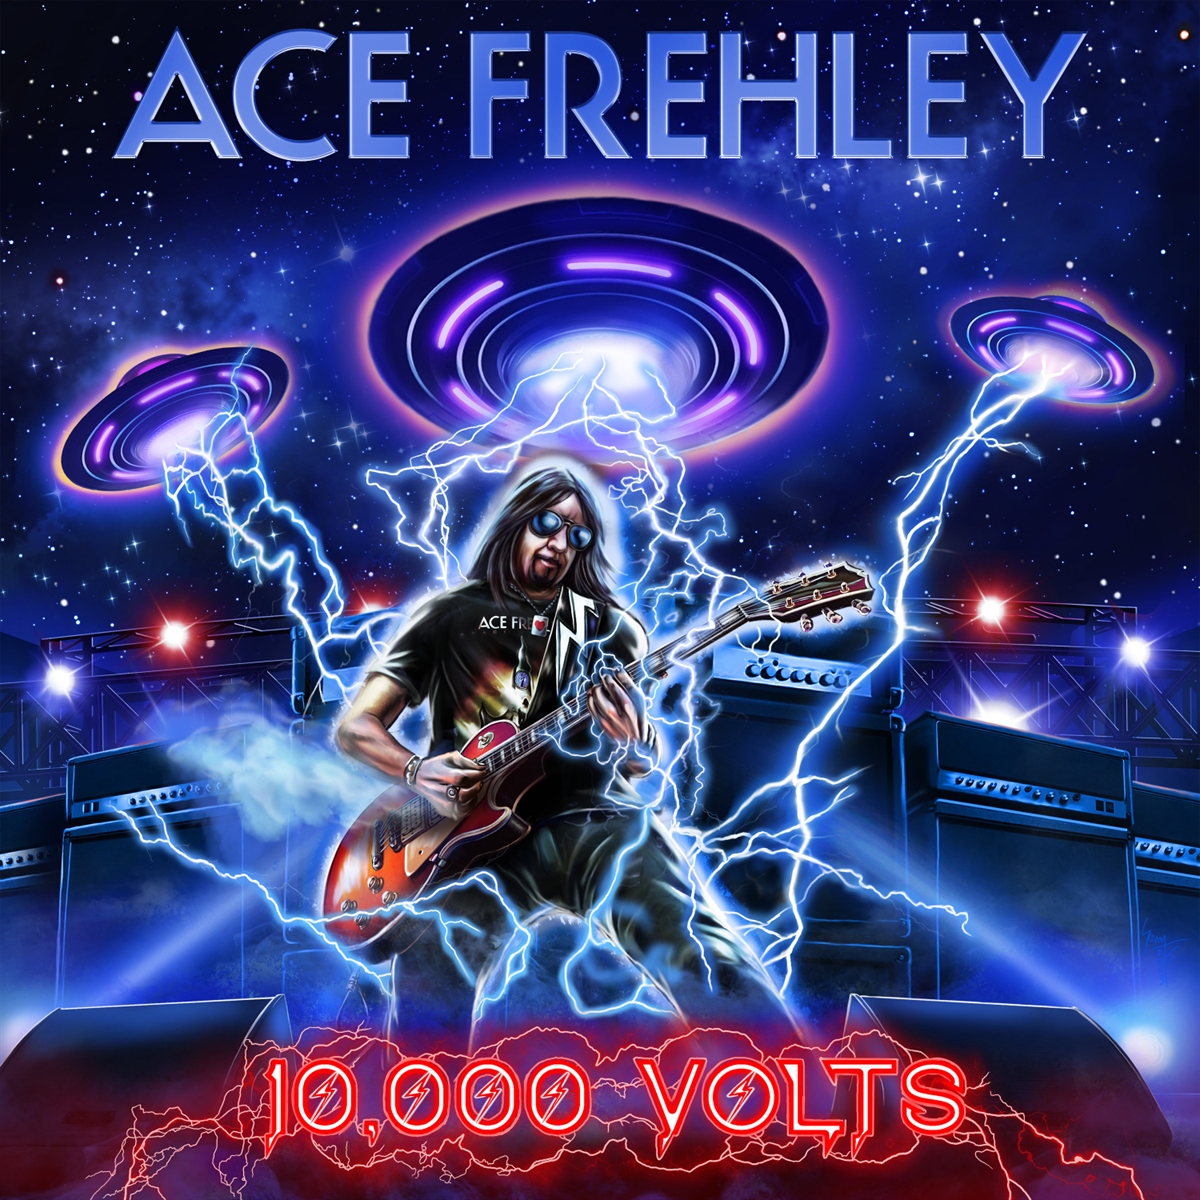 ace-frehley-10-000-volts